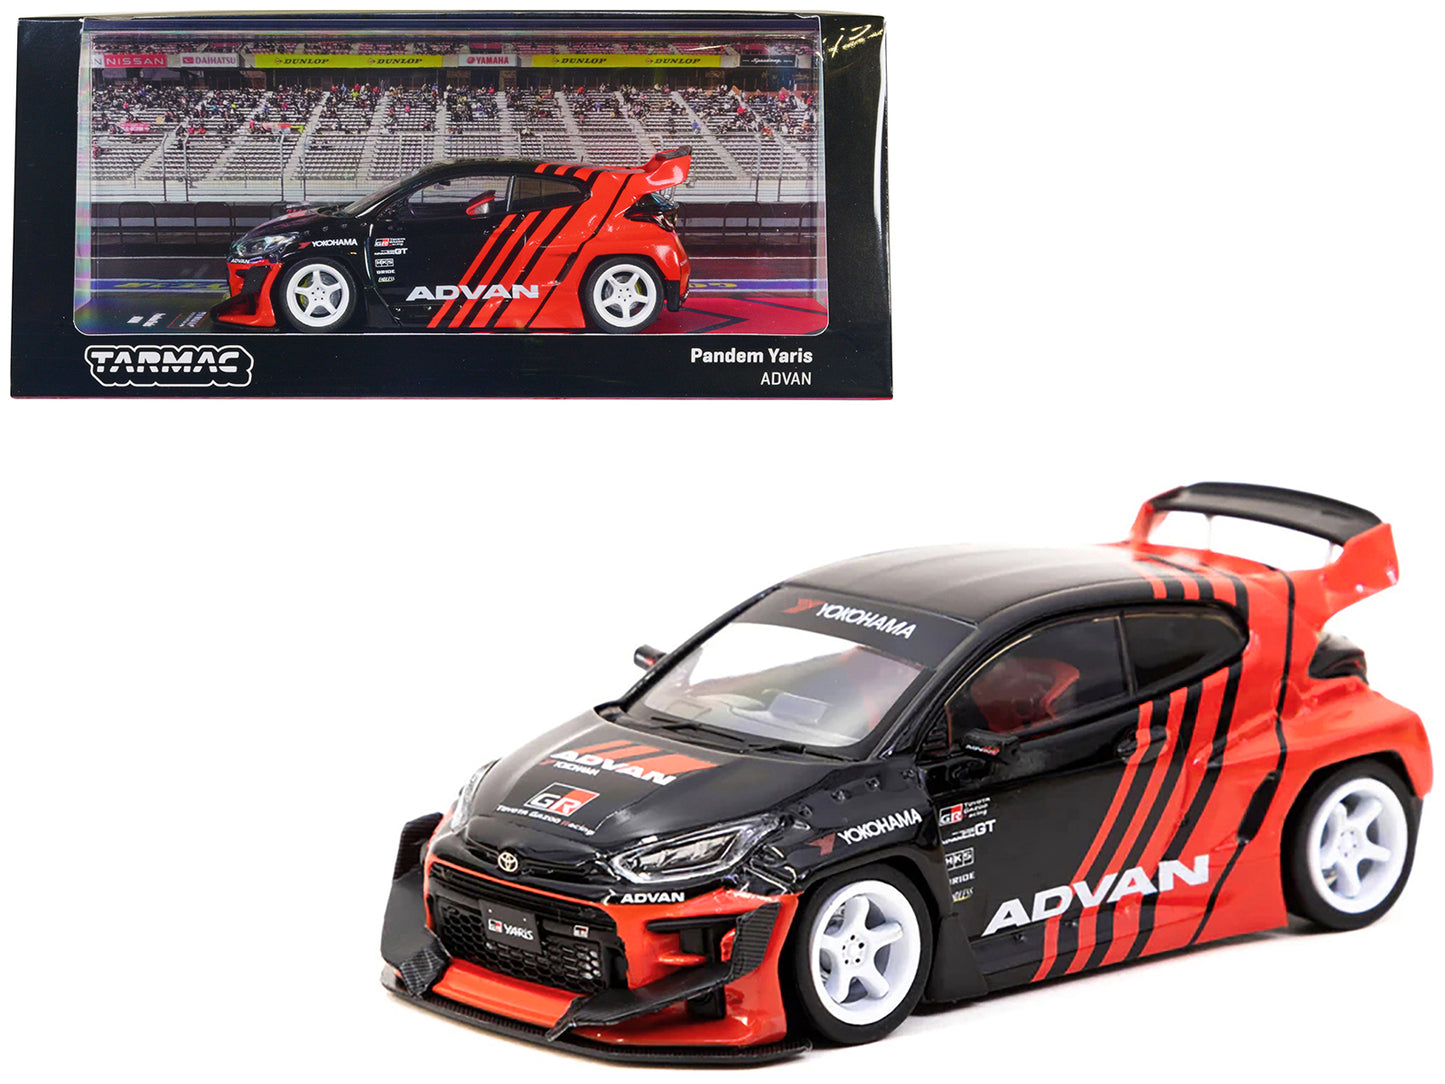 Toyota "Pandem" Yaris RHD (Right Hand Drive) Black and Red "ADVAN" Livery "Hobby43" Series 1/43 Diecast Model Car by Tarmac Works